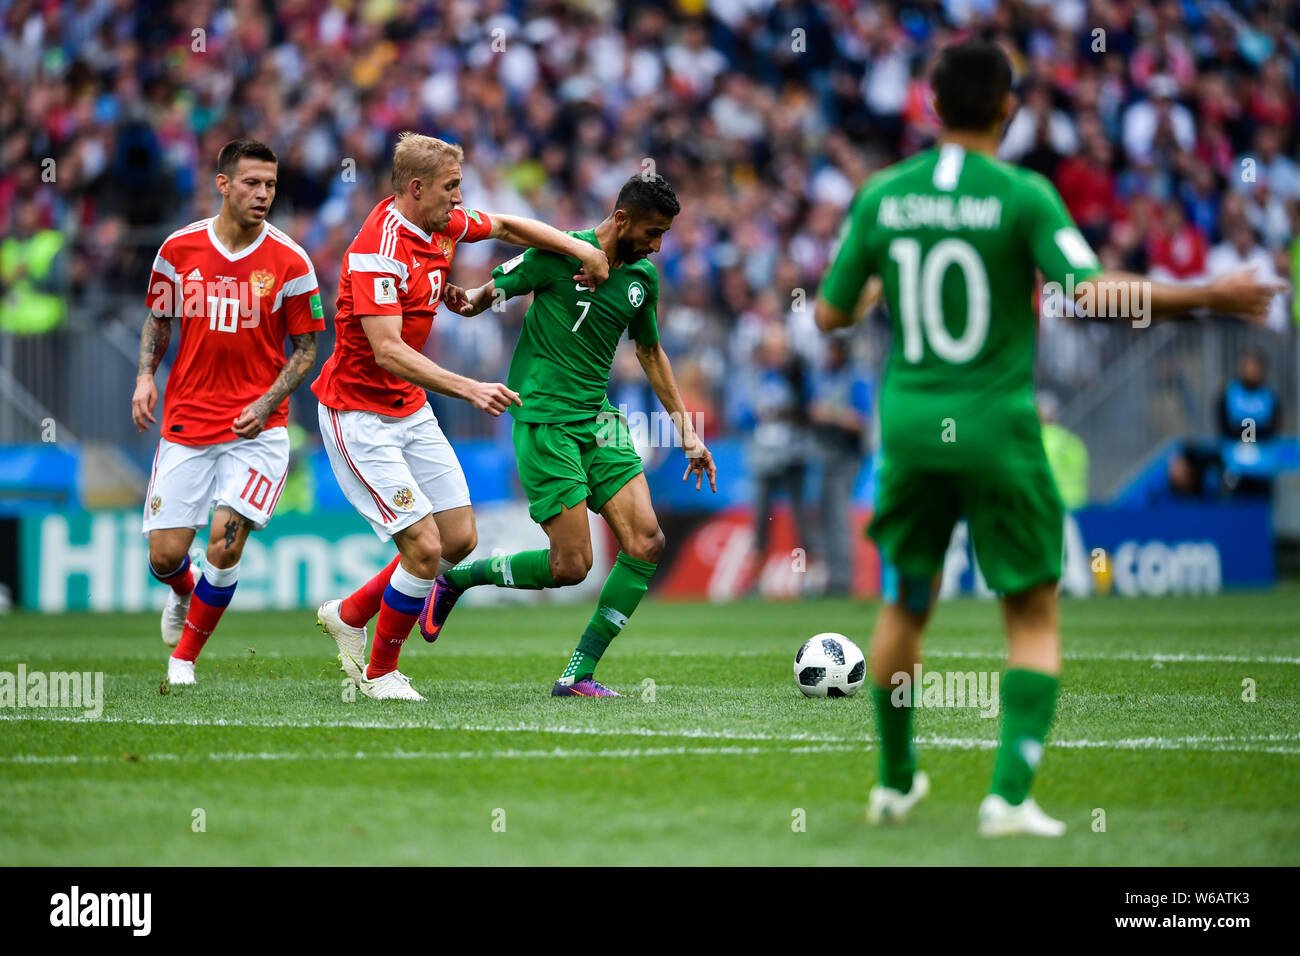 Yury Gazinsky of Russia, left, challenges Daler Kuzyayev of Saudi Arabia in their Group A match during the 2018 FIFA World Cup in Moscow, Russia, 14 J Stock Photo